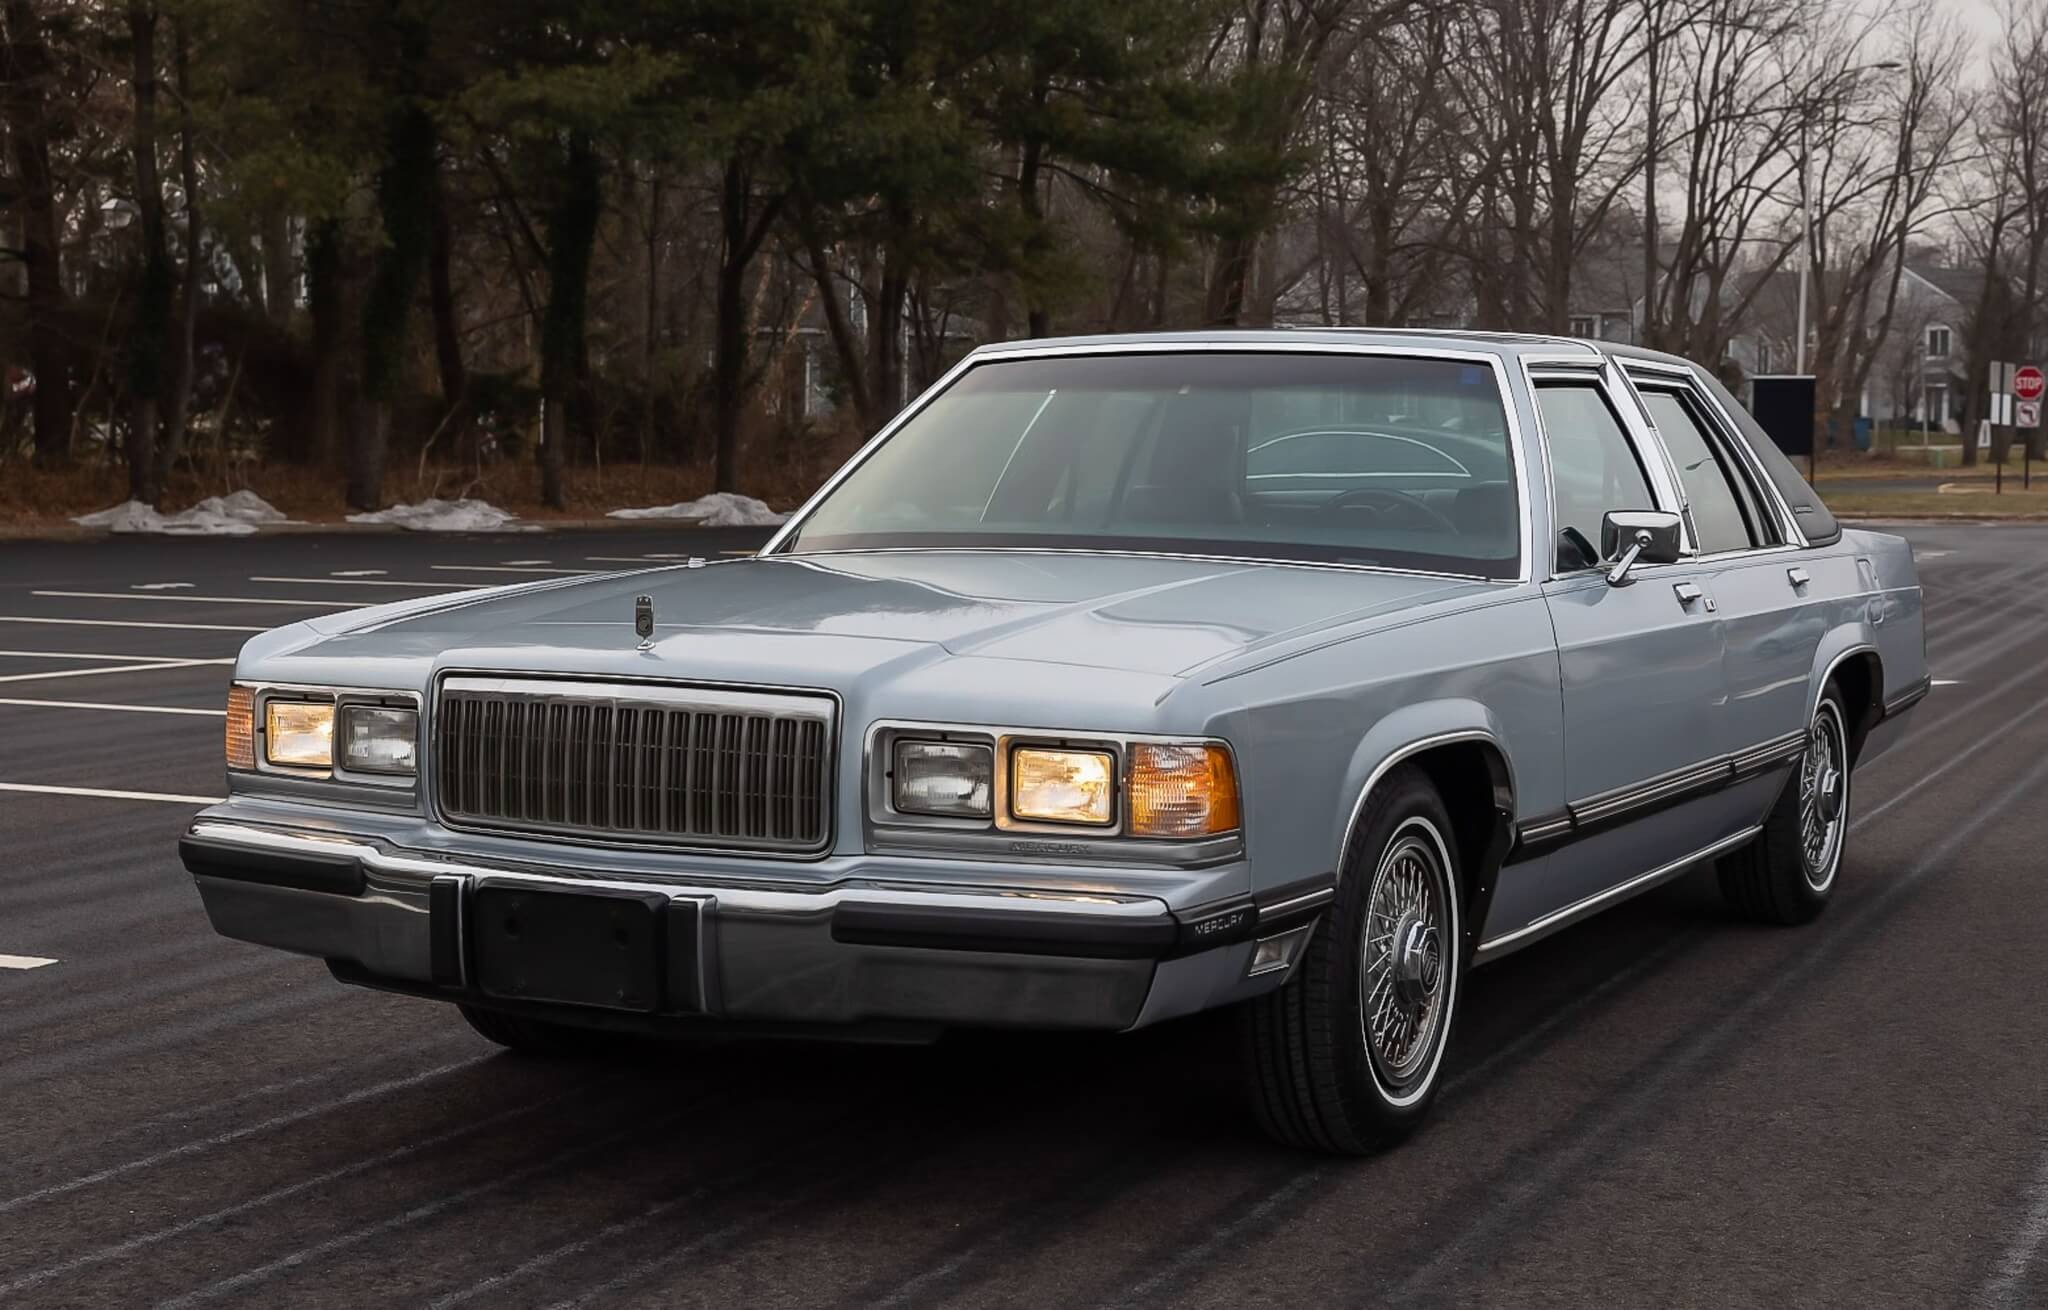 <p>Aimed at the mid-size US market, the Grand Marquis was Ford’s way of tackling the likes of the Buick Le Sabre using the Mercury brand. Offered in saloon and coupe shapes, the Grand Marquis stuck with <strong>V8 engines</strong> throughout its lifespan.</p><p>Sadly, the styling wilted from the original car’s sharply creased lines to an amorphous rounded saloon shape by the time of its demise in 2011; the <strong>Mercury marque died</strong> with it. Alternatively, the <strong>Cougar</strong> has sold such a similar number of cars to the Grand Marquis, that it is impossible to accurately call which was more popular, as Ford has not confirmed.</p>